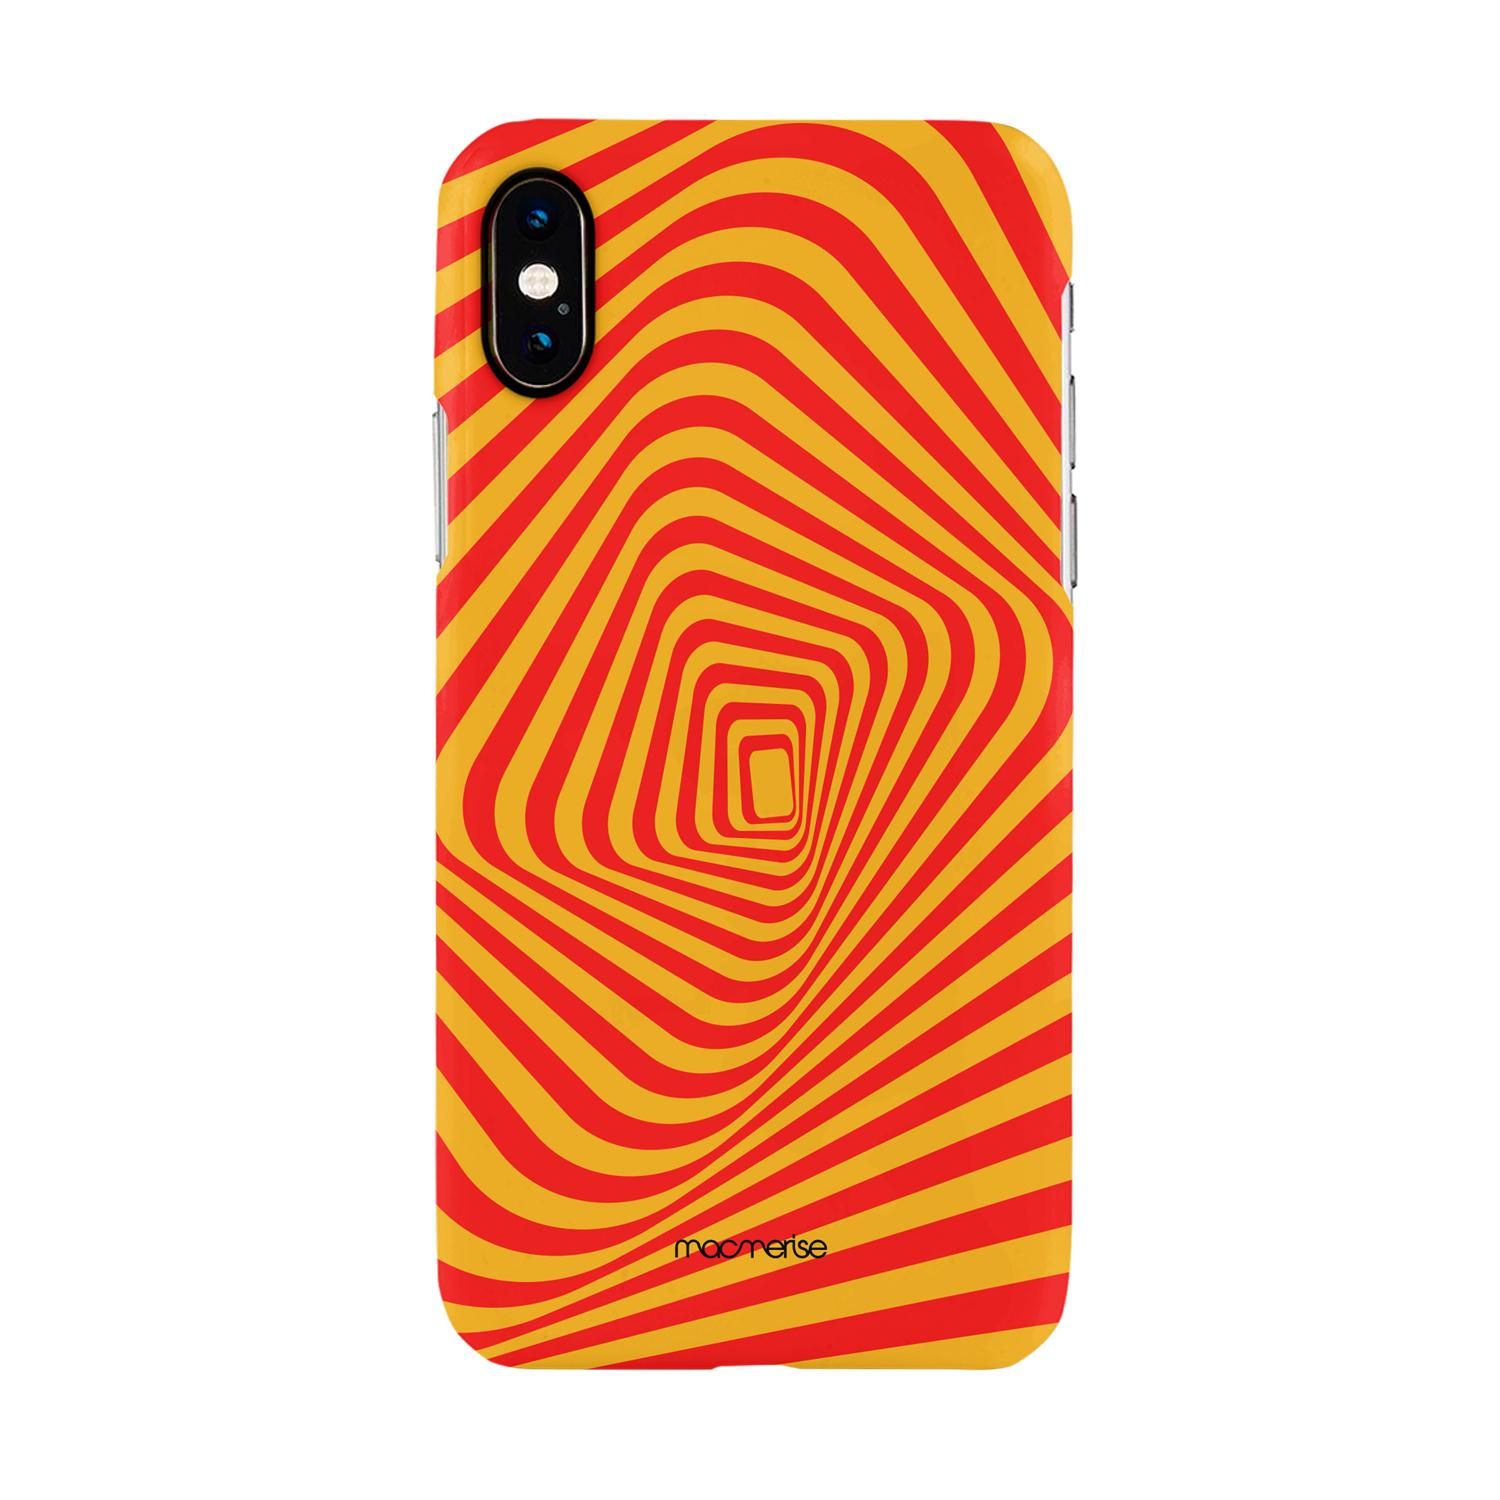 Physiollusion - Sleek Case for iPhone XS Max